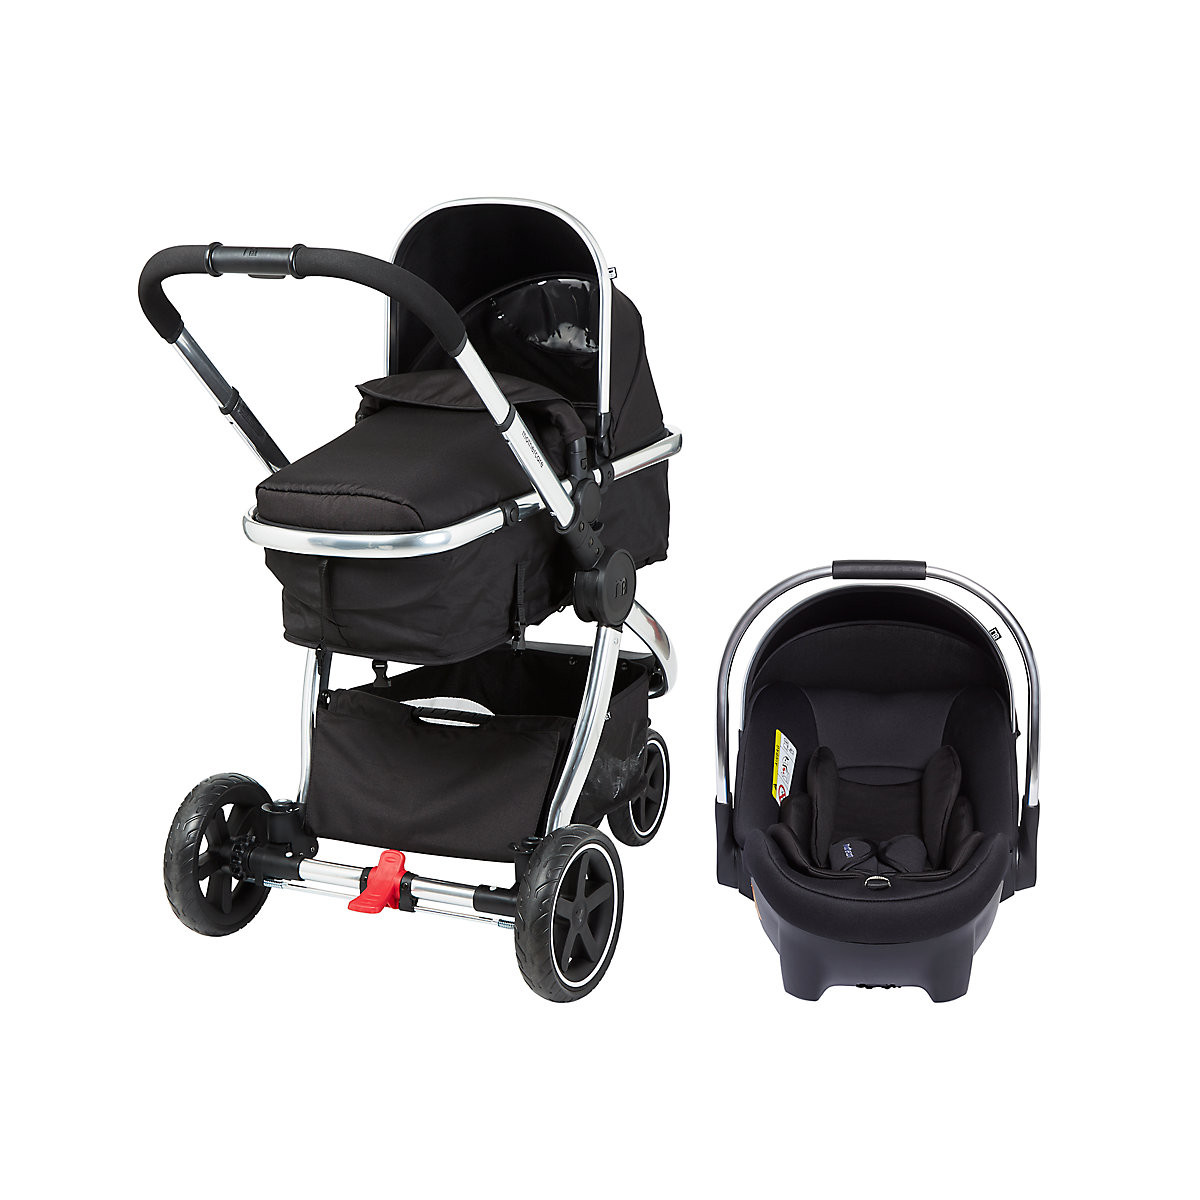 oyster 3 travel system mothercare